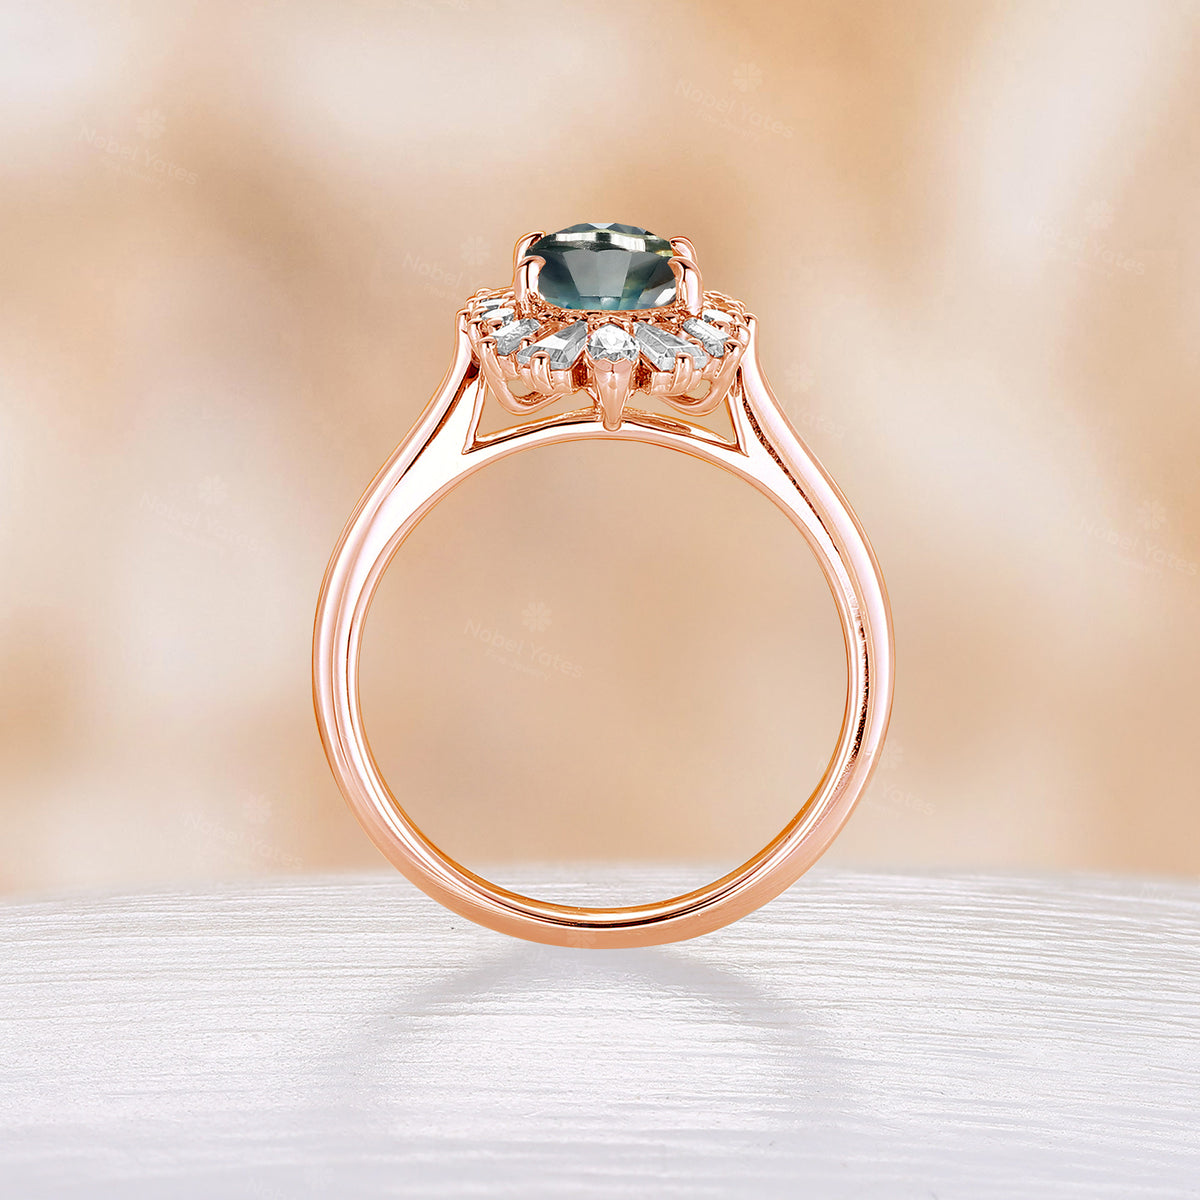 Art Deco Oval Cut Teal Sapphire Engagement Halo Ring Rose Gold